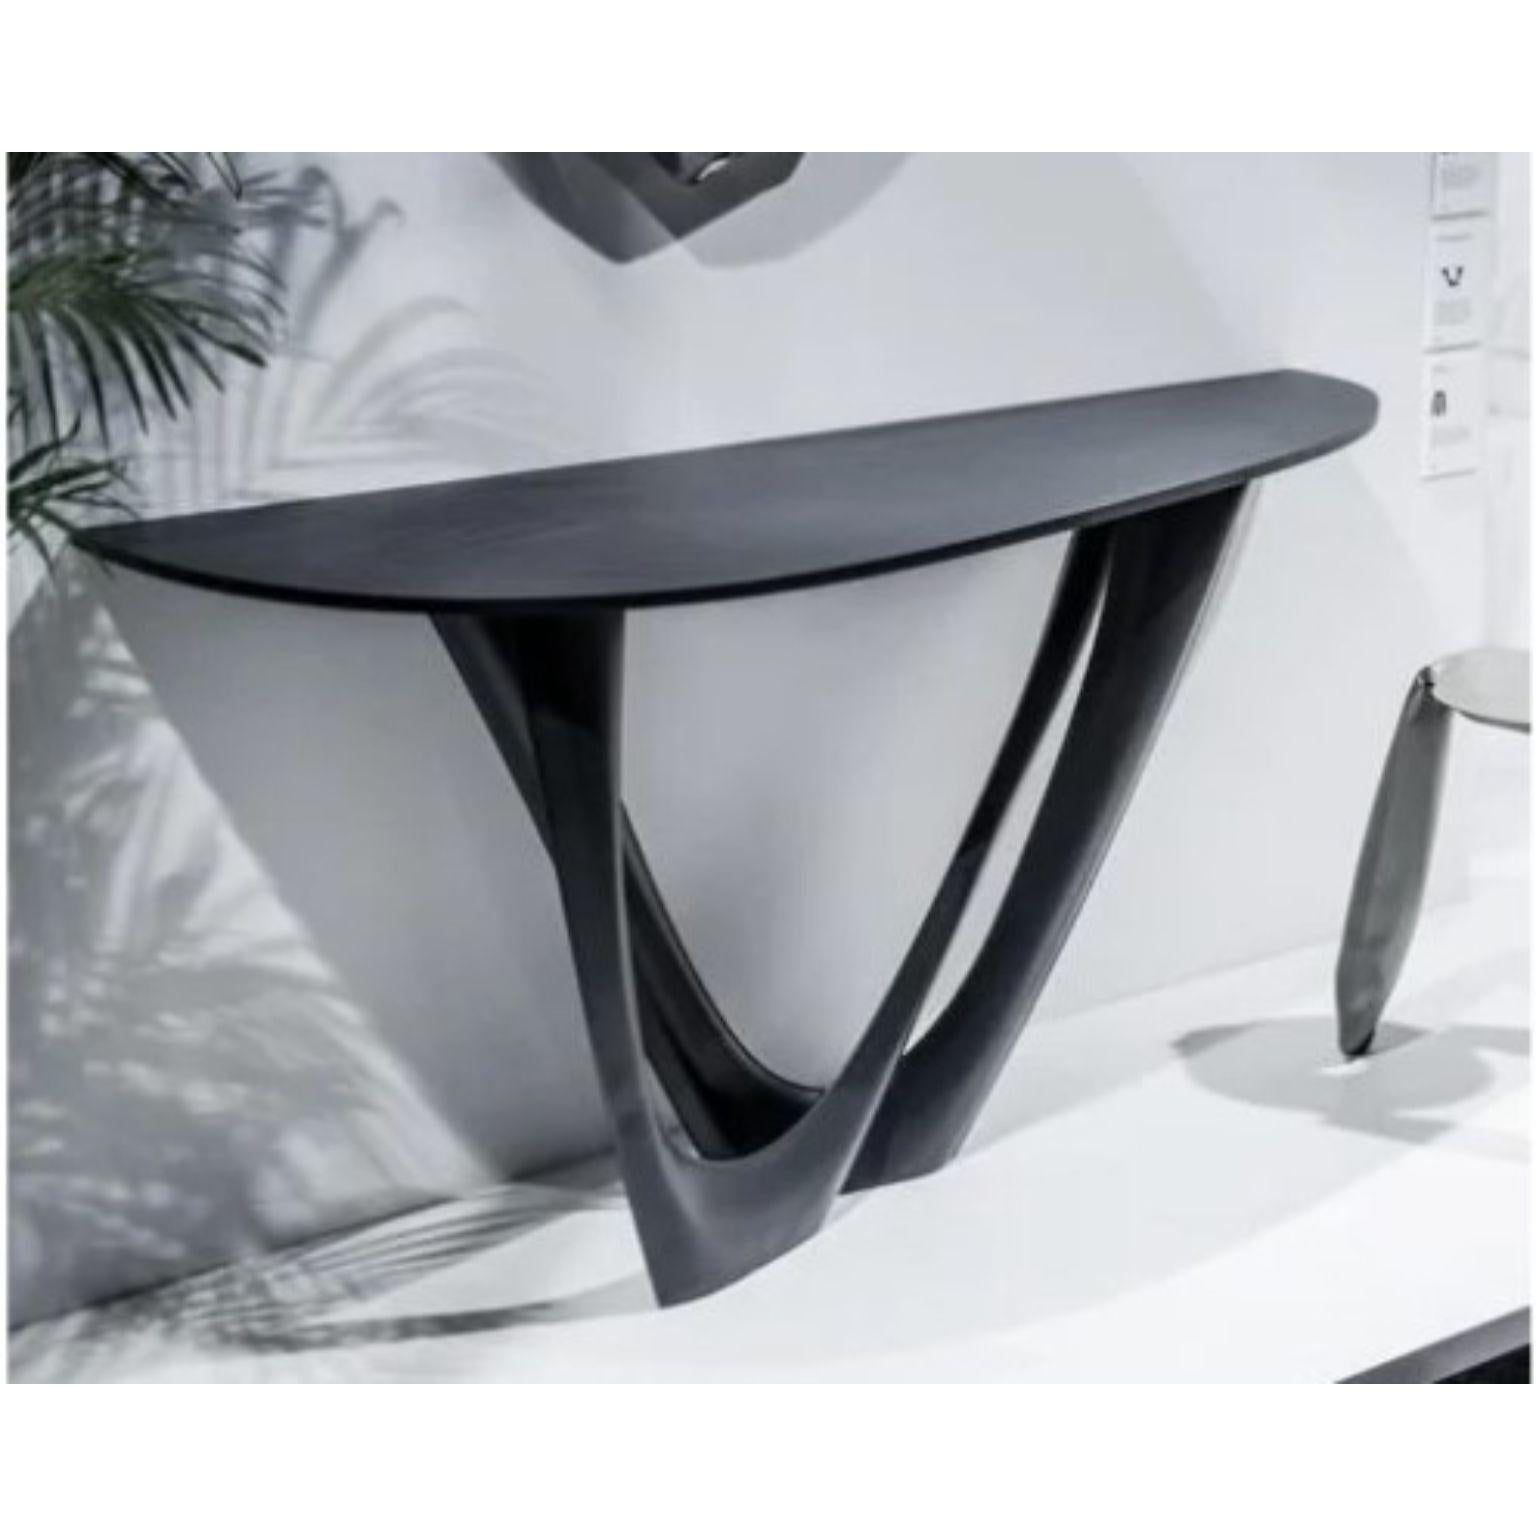 Powder-Coated Black Brown G-Console Duo Steel Base and Top by Zieta For Sale